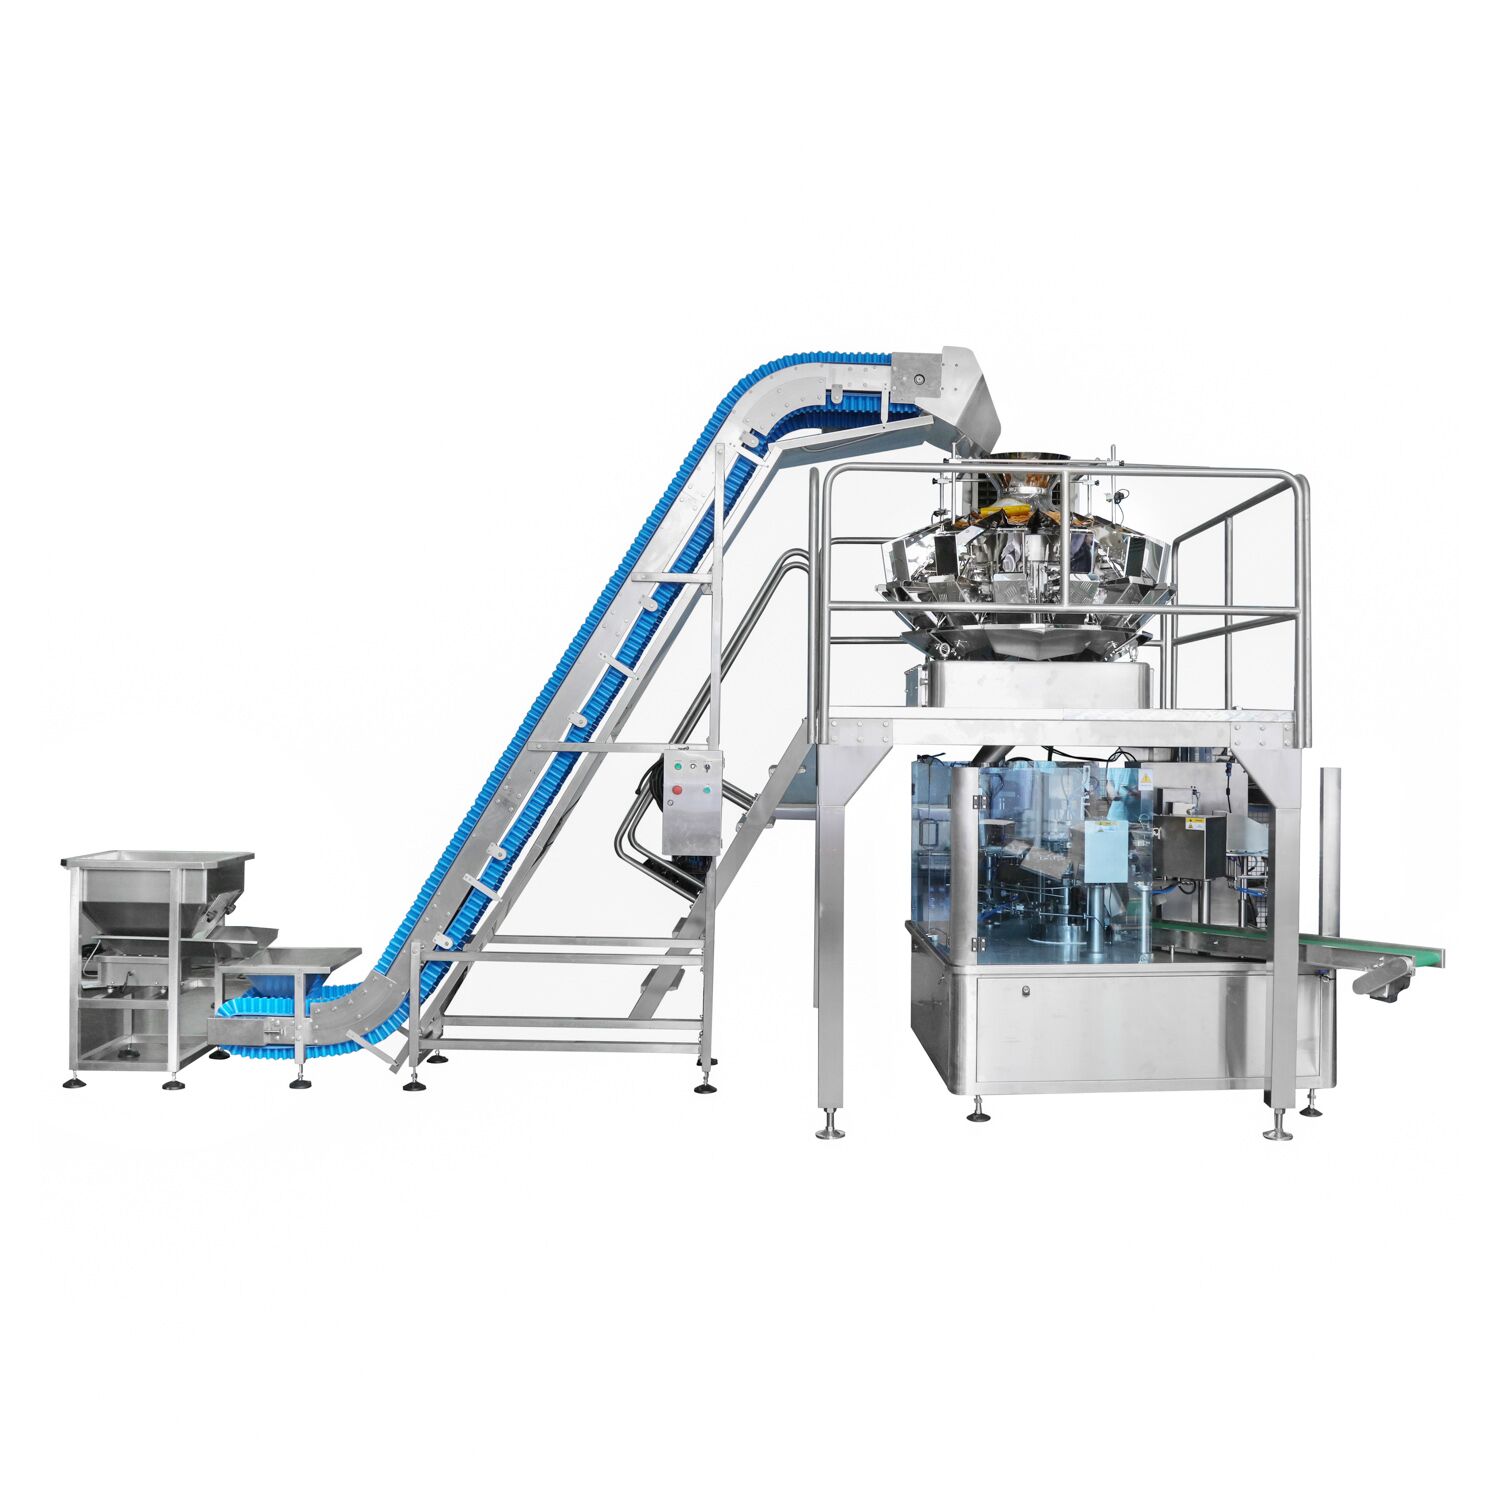 Features of Automatic bag-feeding pouch packaging machine